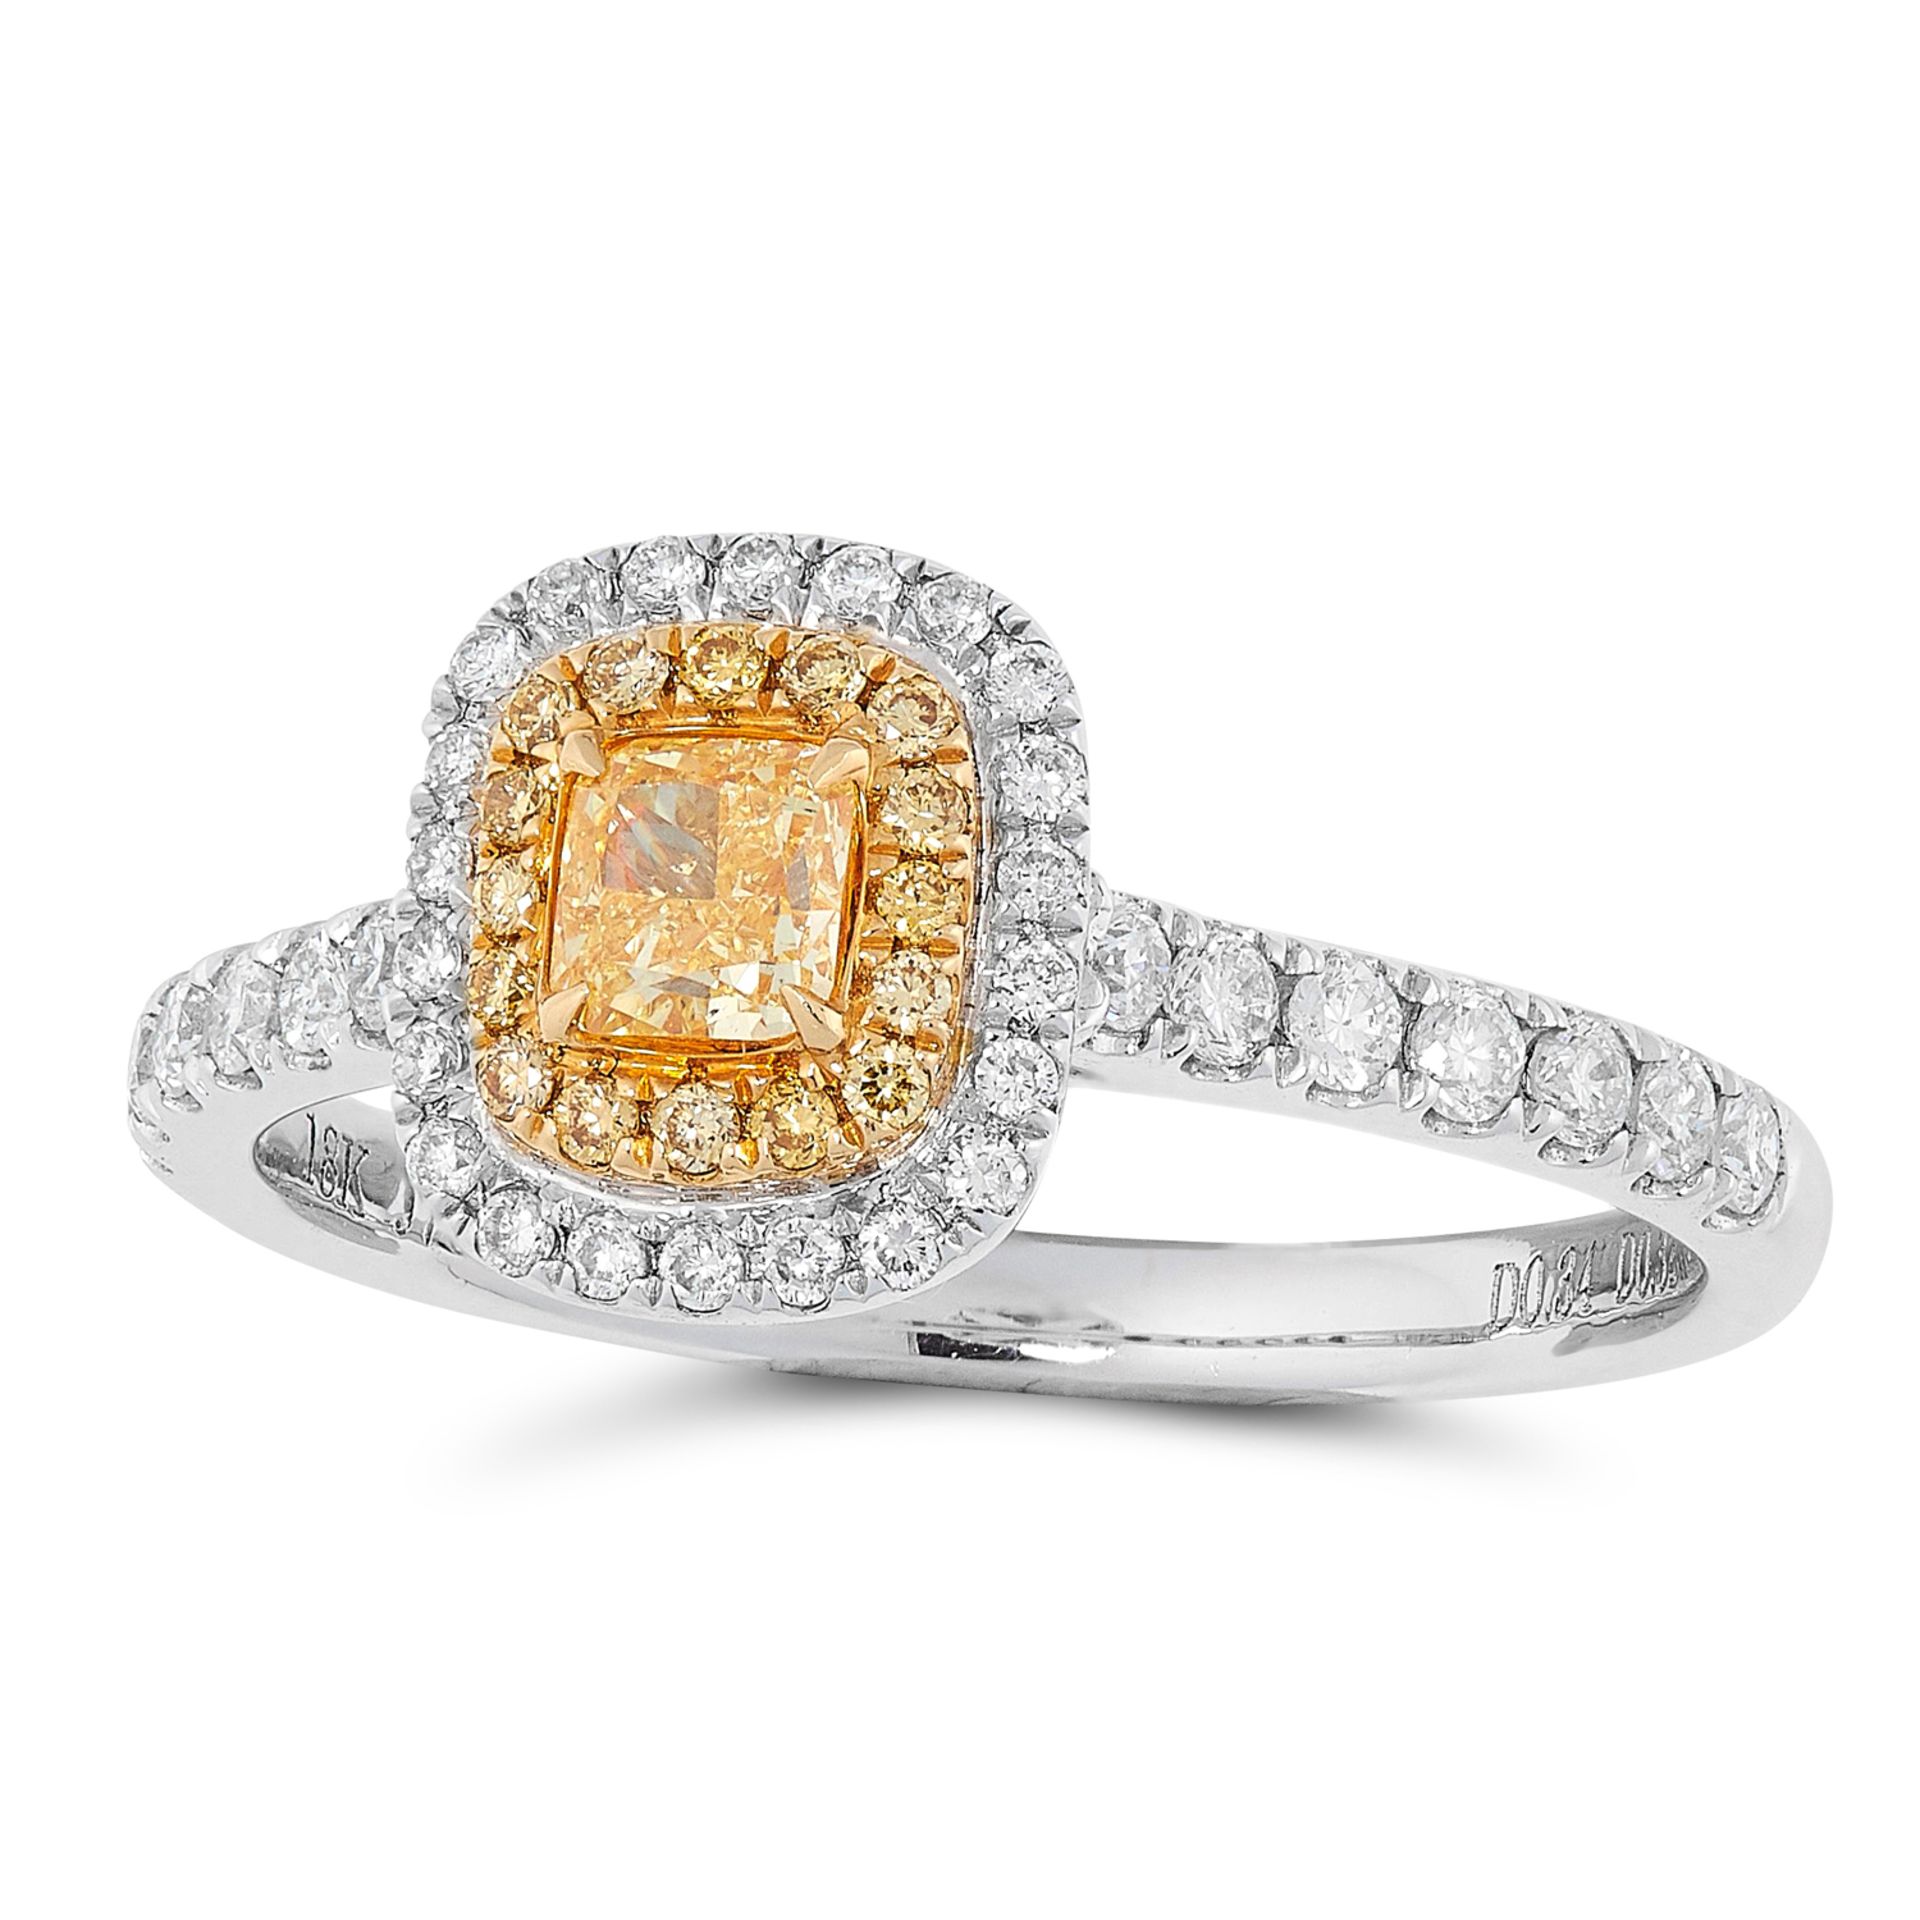 A FANCY YELLOW DIAMOND CLUSTER RING set with a fancy yellow cushion cut diamond of 0.34 carats in